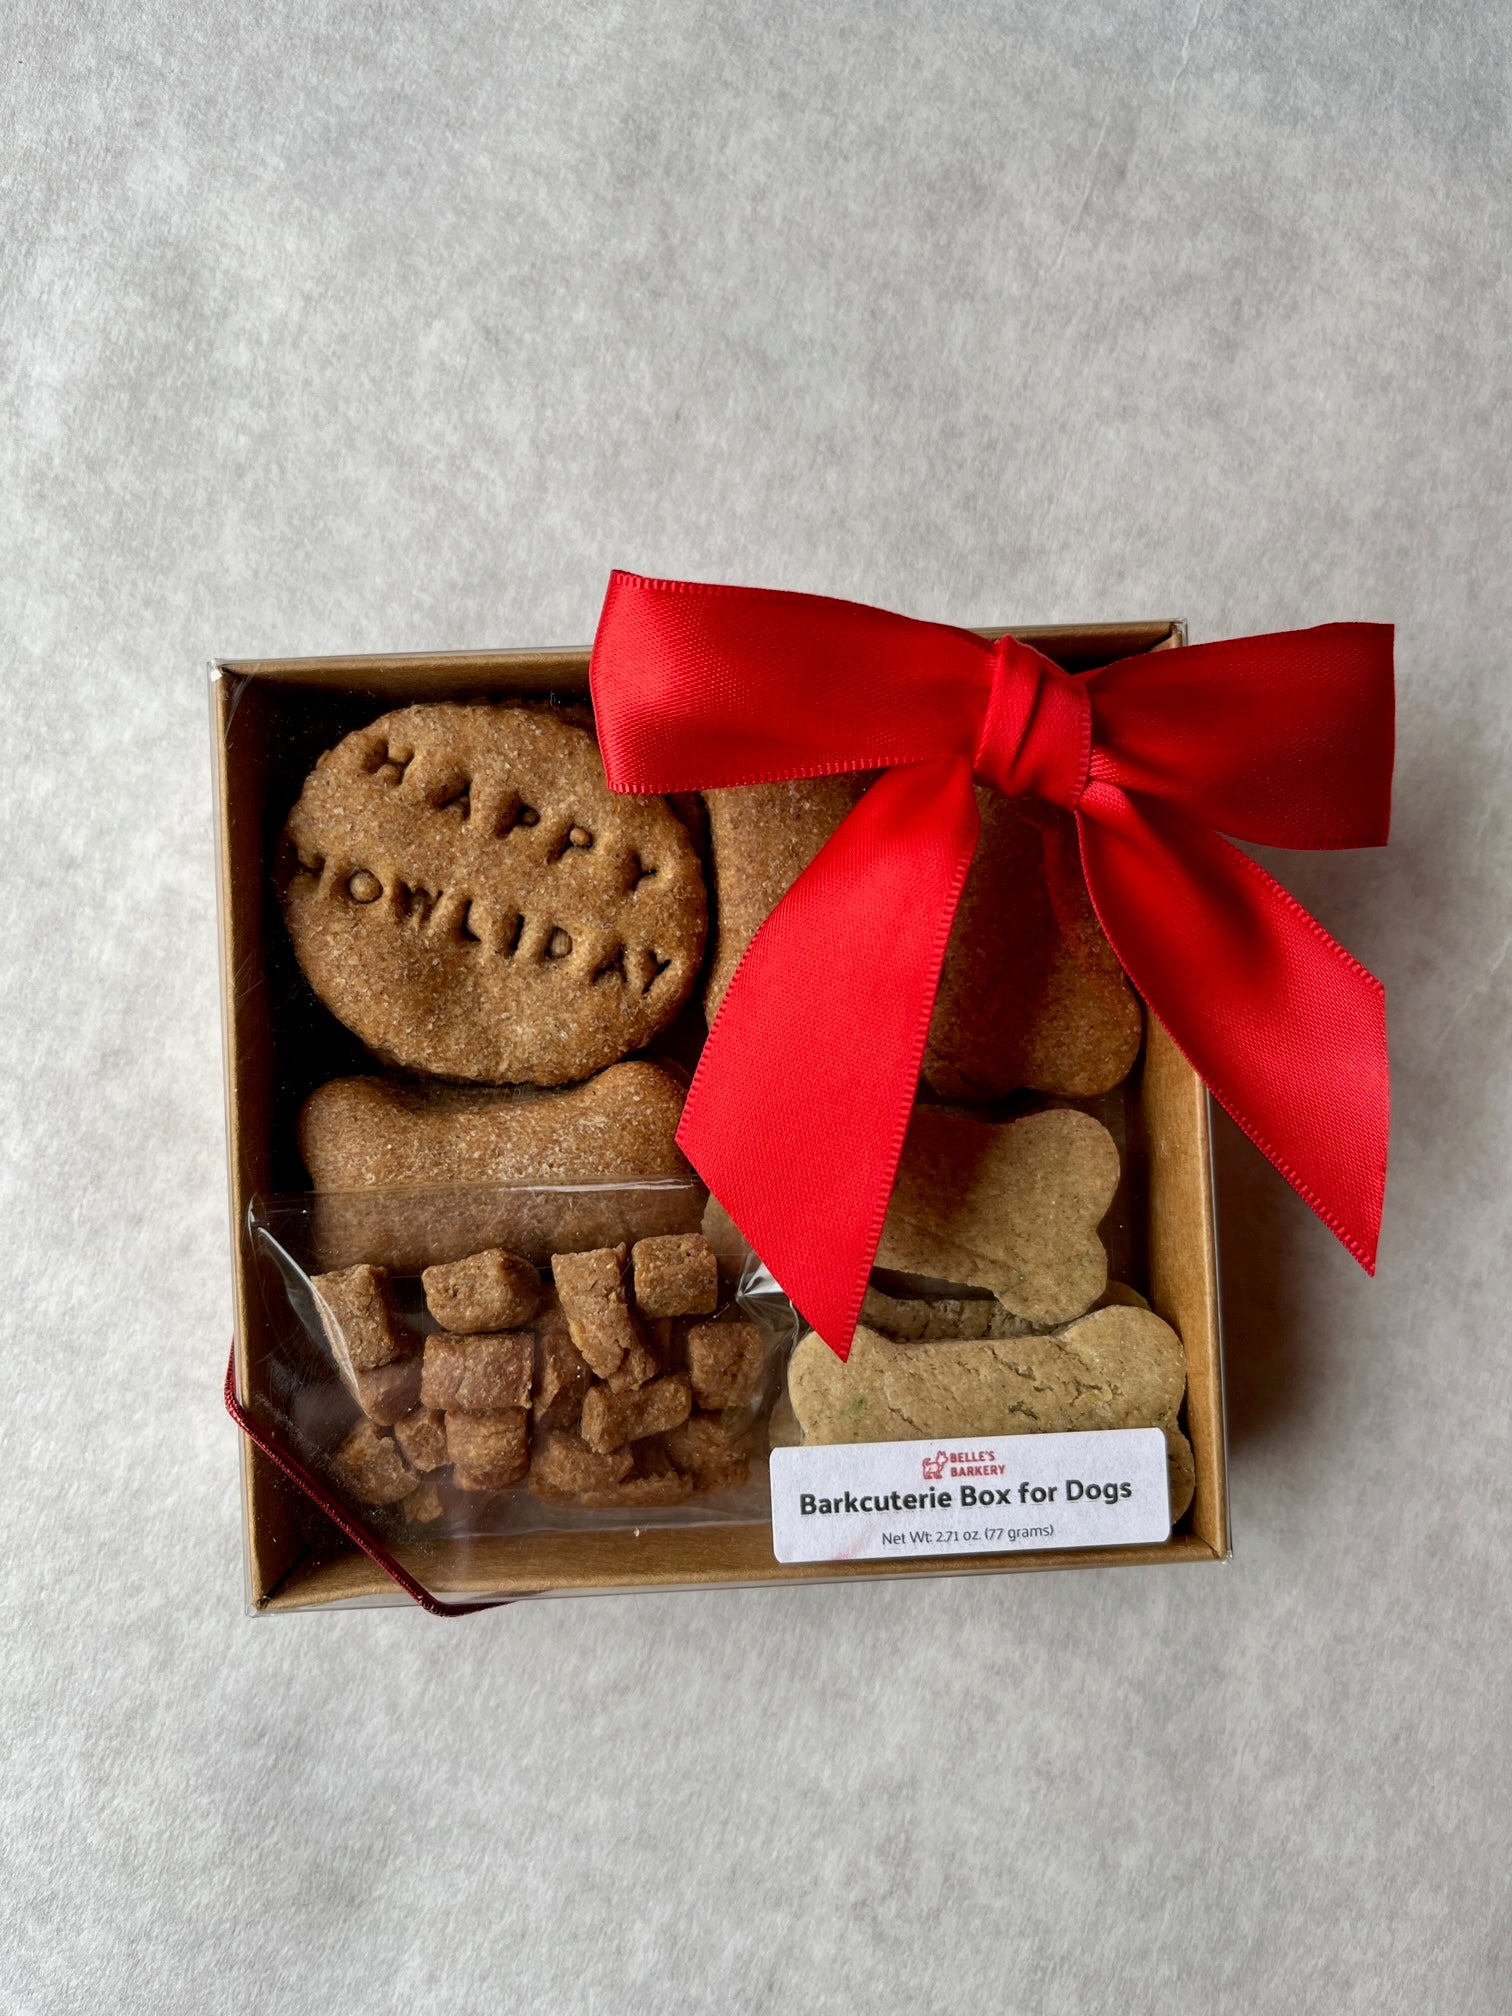 Small Barkcuterie Box with red bow